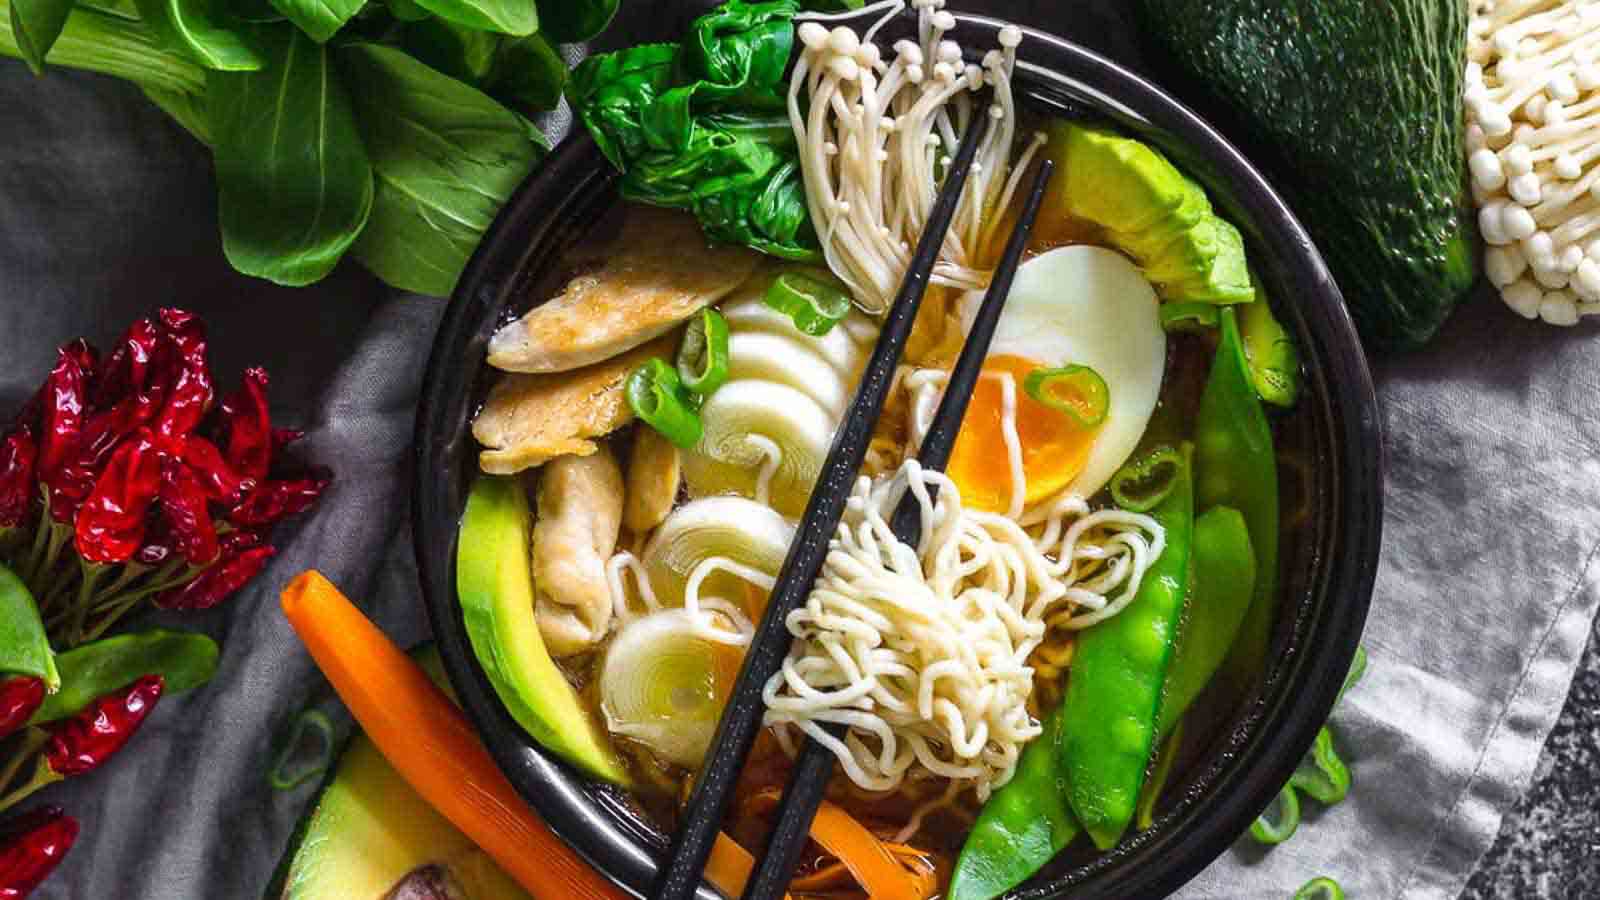 Ramen Chicken Noodles in a black bowl with various vegetables and boiled egg.